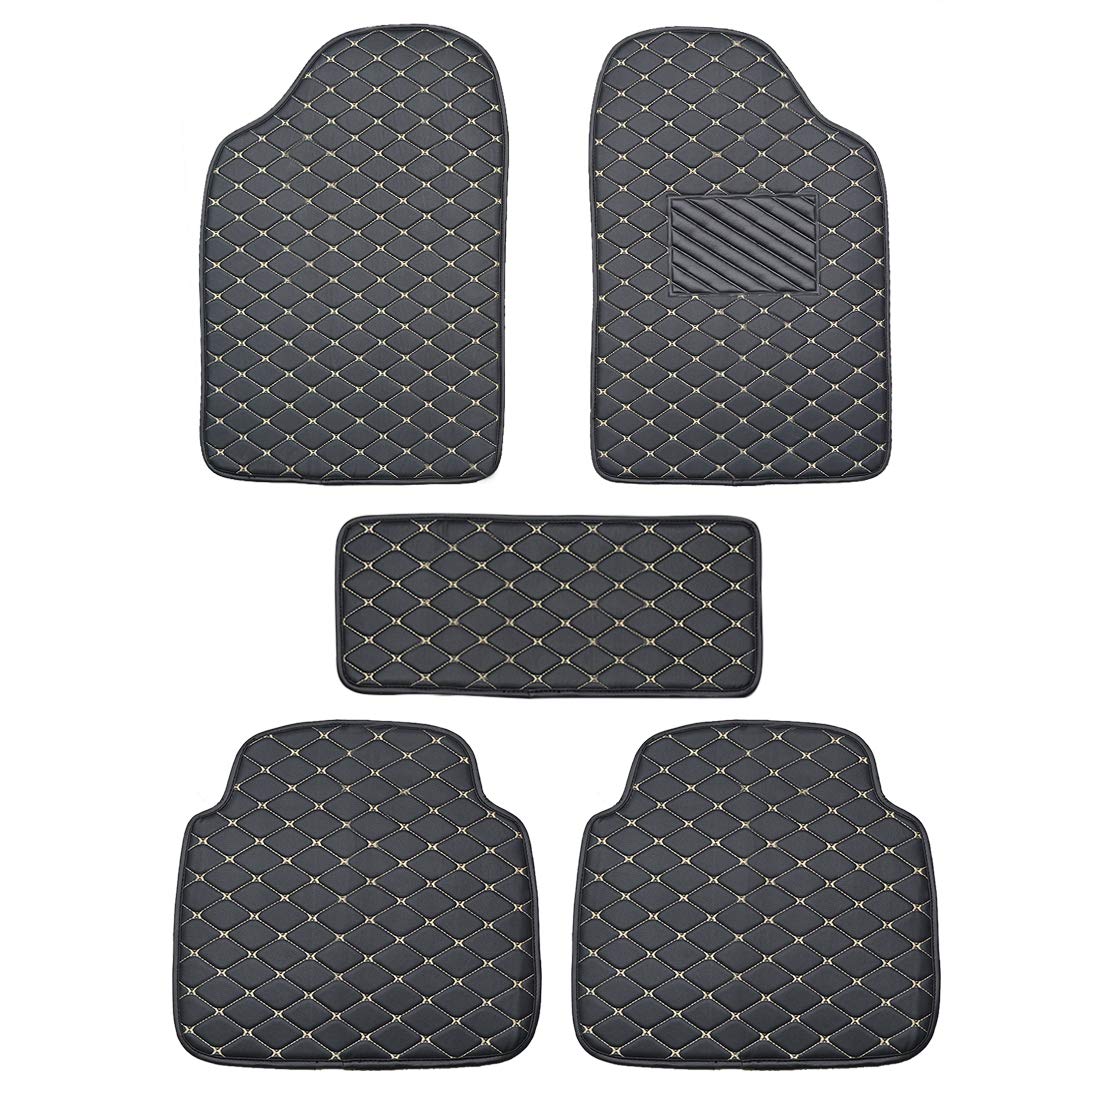 Buy Universal 2D Premium Leather Car Foot Mats for 2 Rows-Black Online  atâœ“Best Price in India